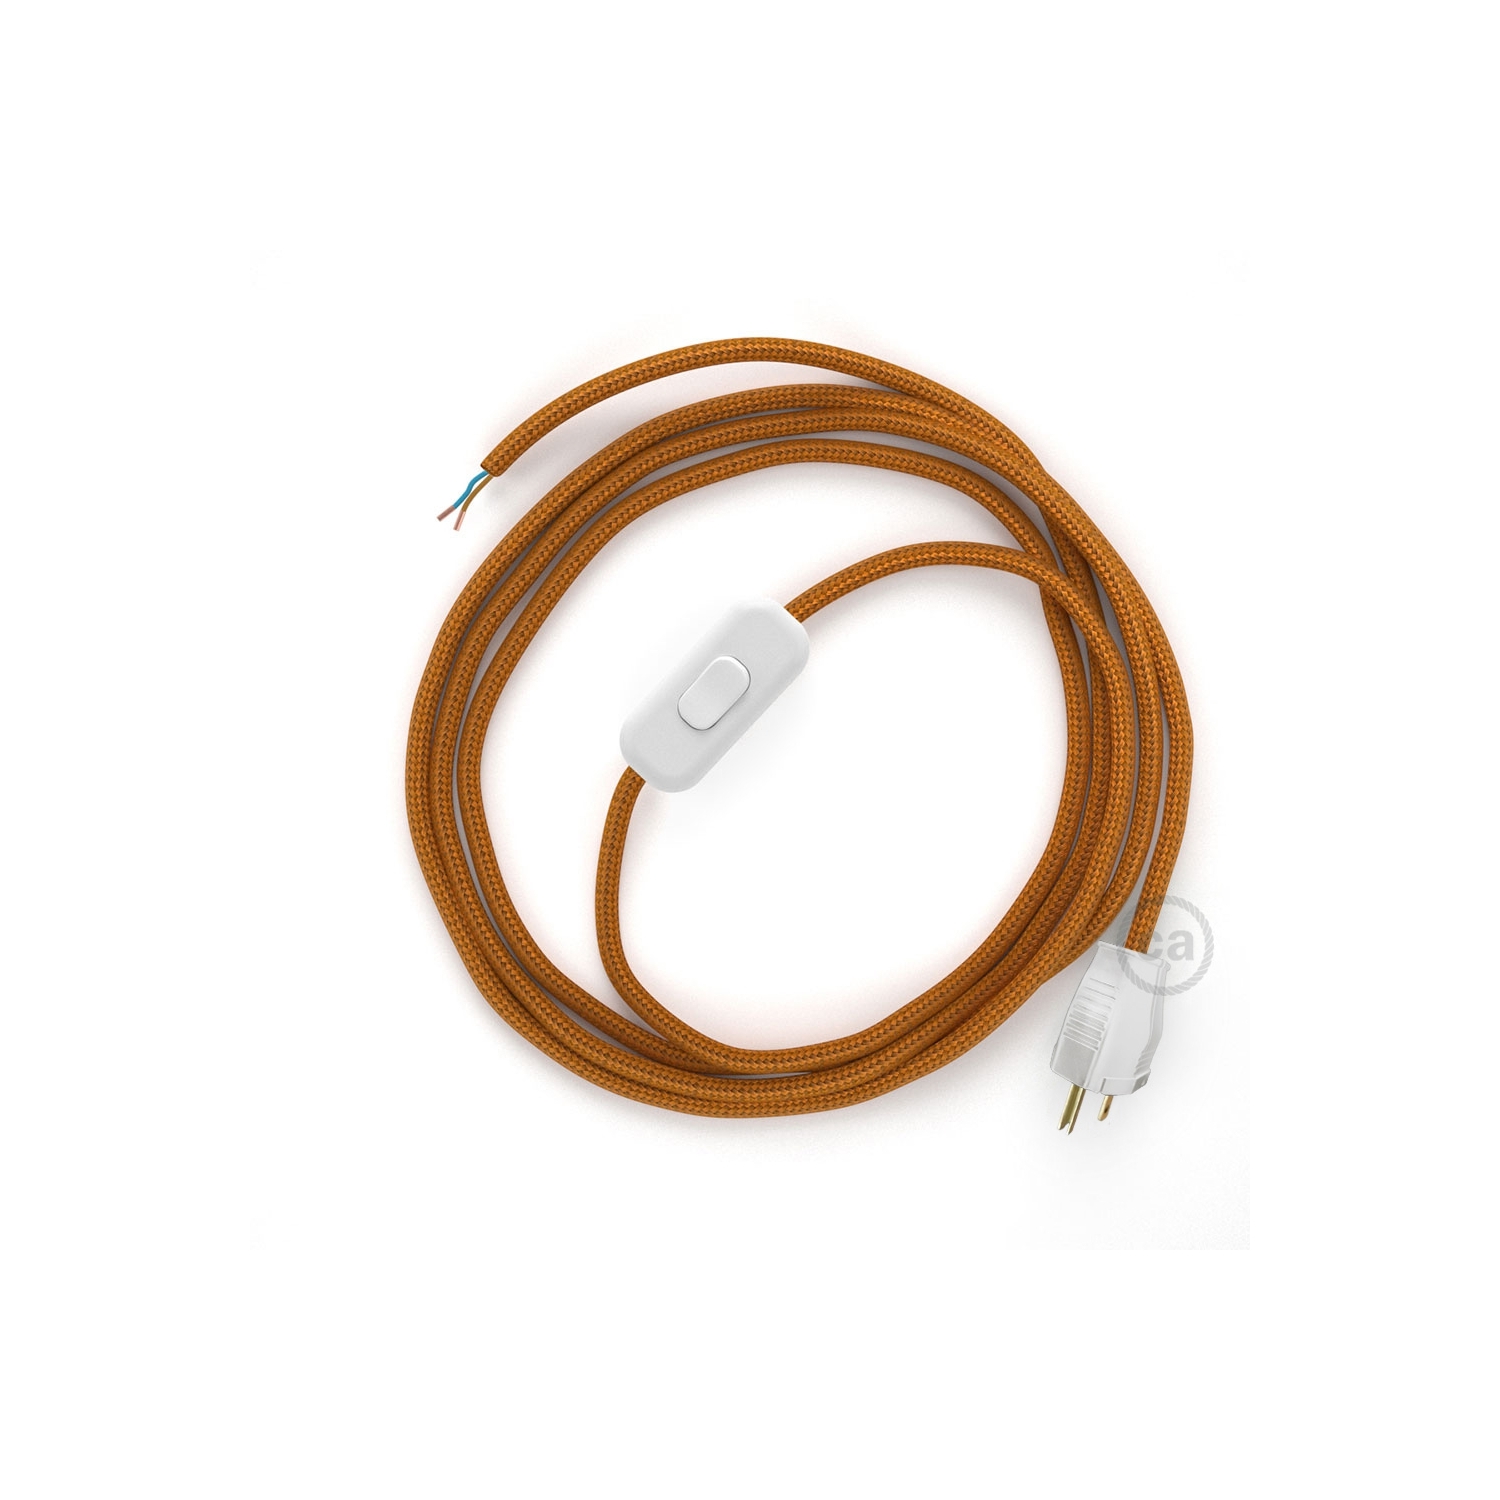 Power Cord with in-line switch, RM22 Copper Rayon - Choose color of switch/plug